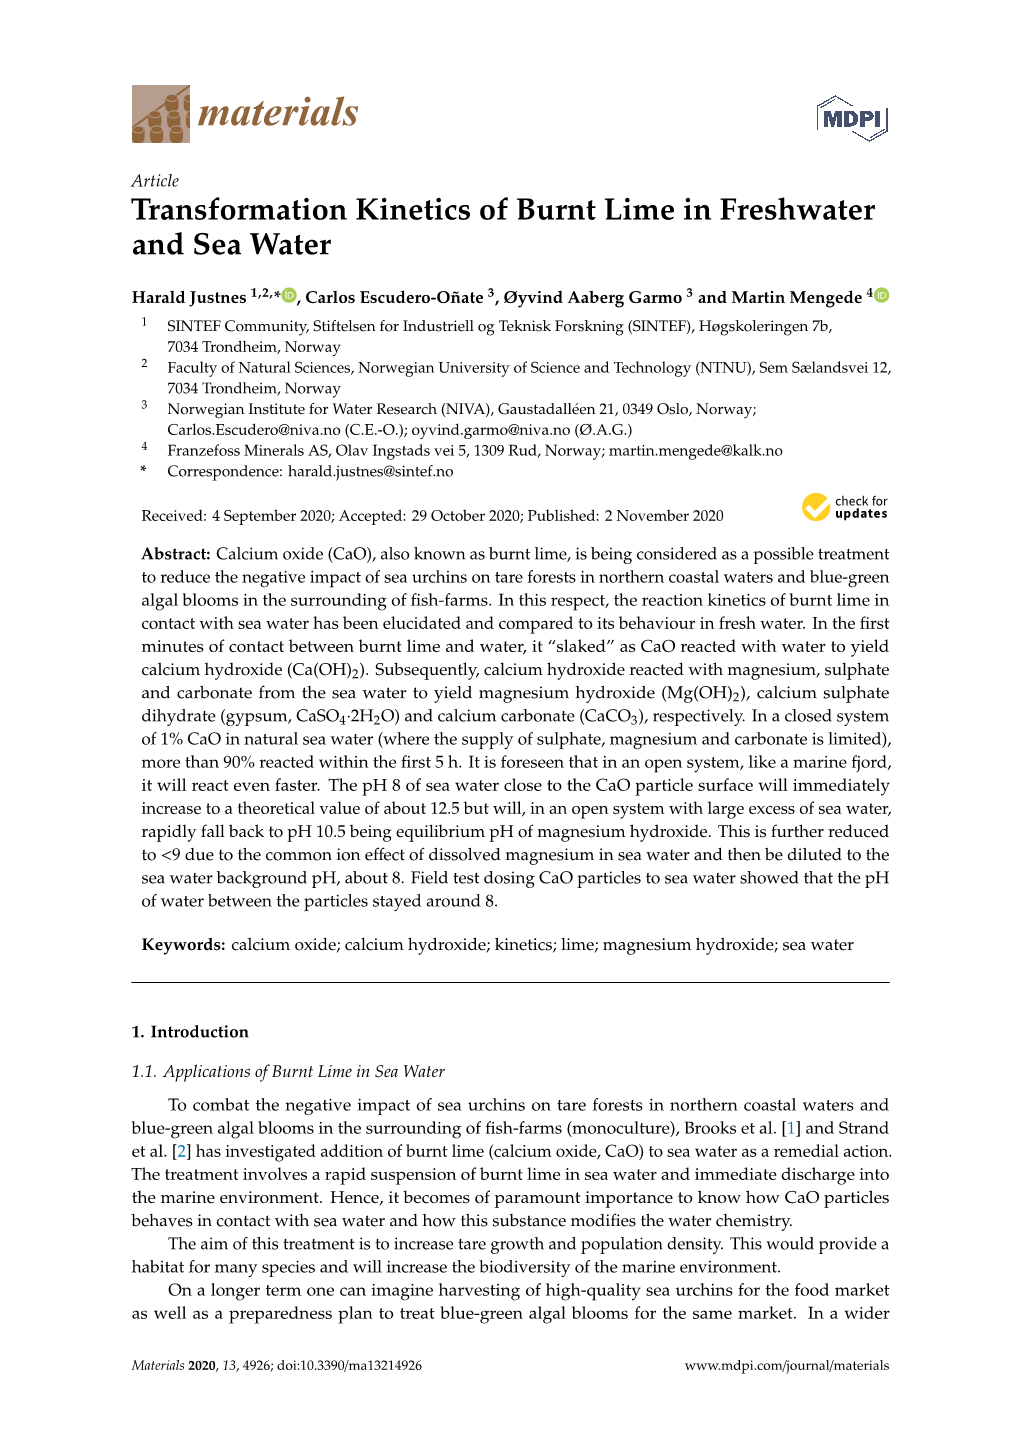 Transformation Kinetics of Burnt Lime in Freshwater and Sea Water